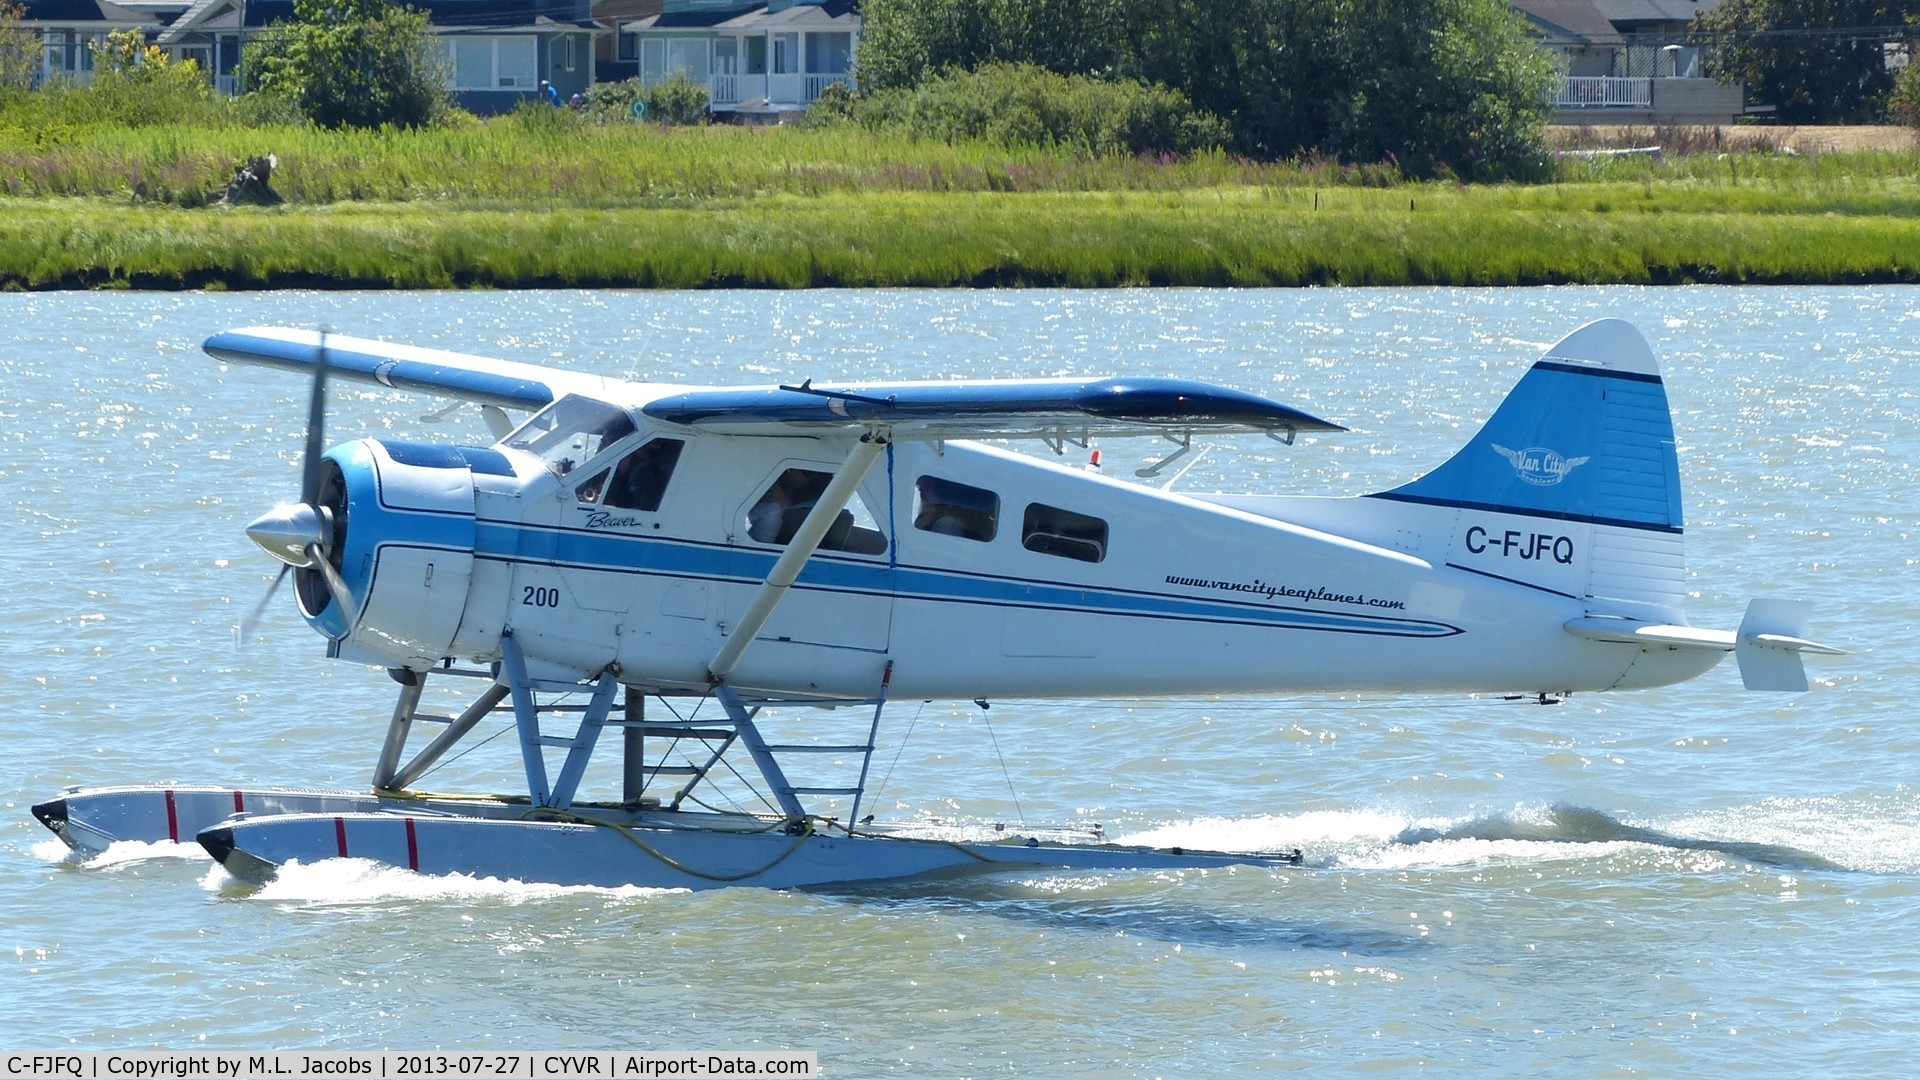 C-FJFQ, 1956 De Havilland Canada DHC-2 Beaver Mk.1 C/N 963, Van City Seaplanes #200 taxiing to takeoff position on the Fraser River.